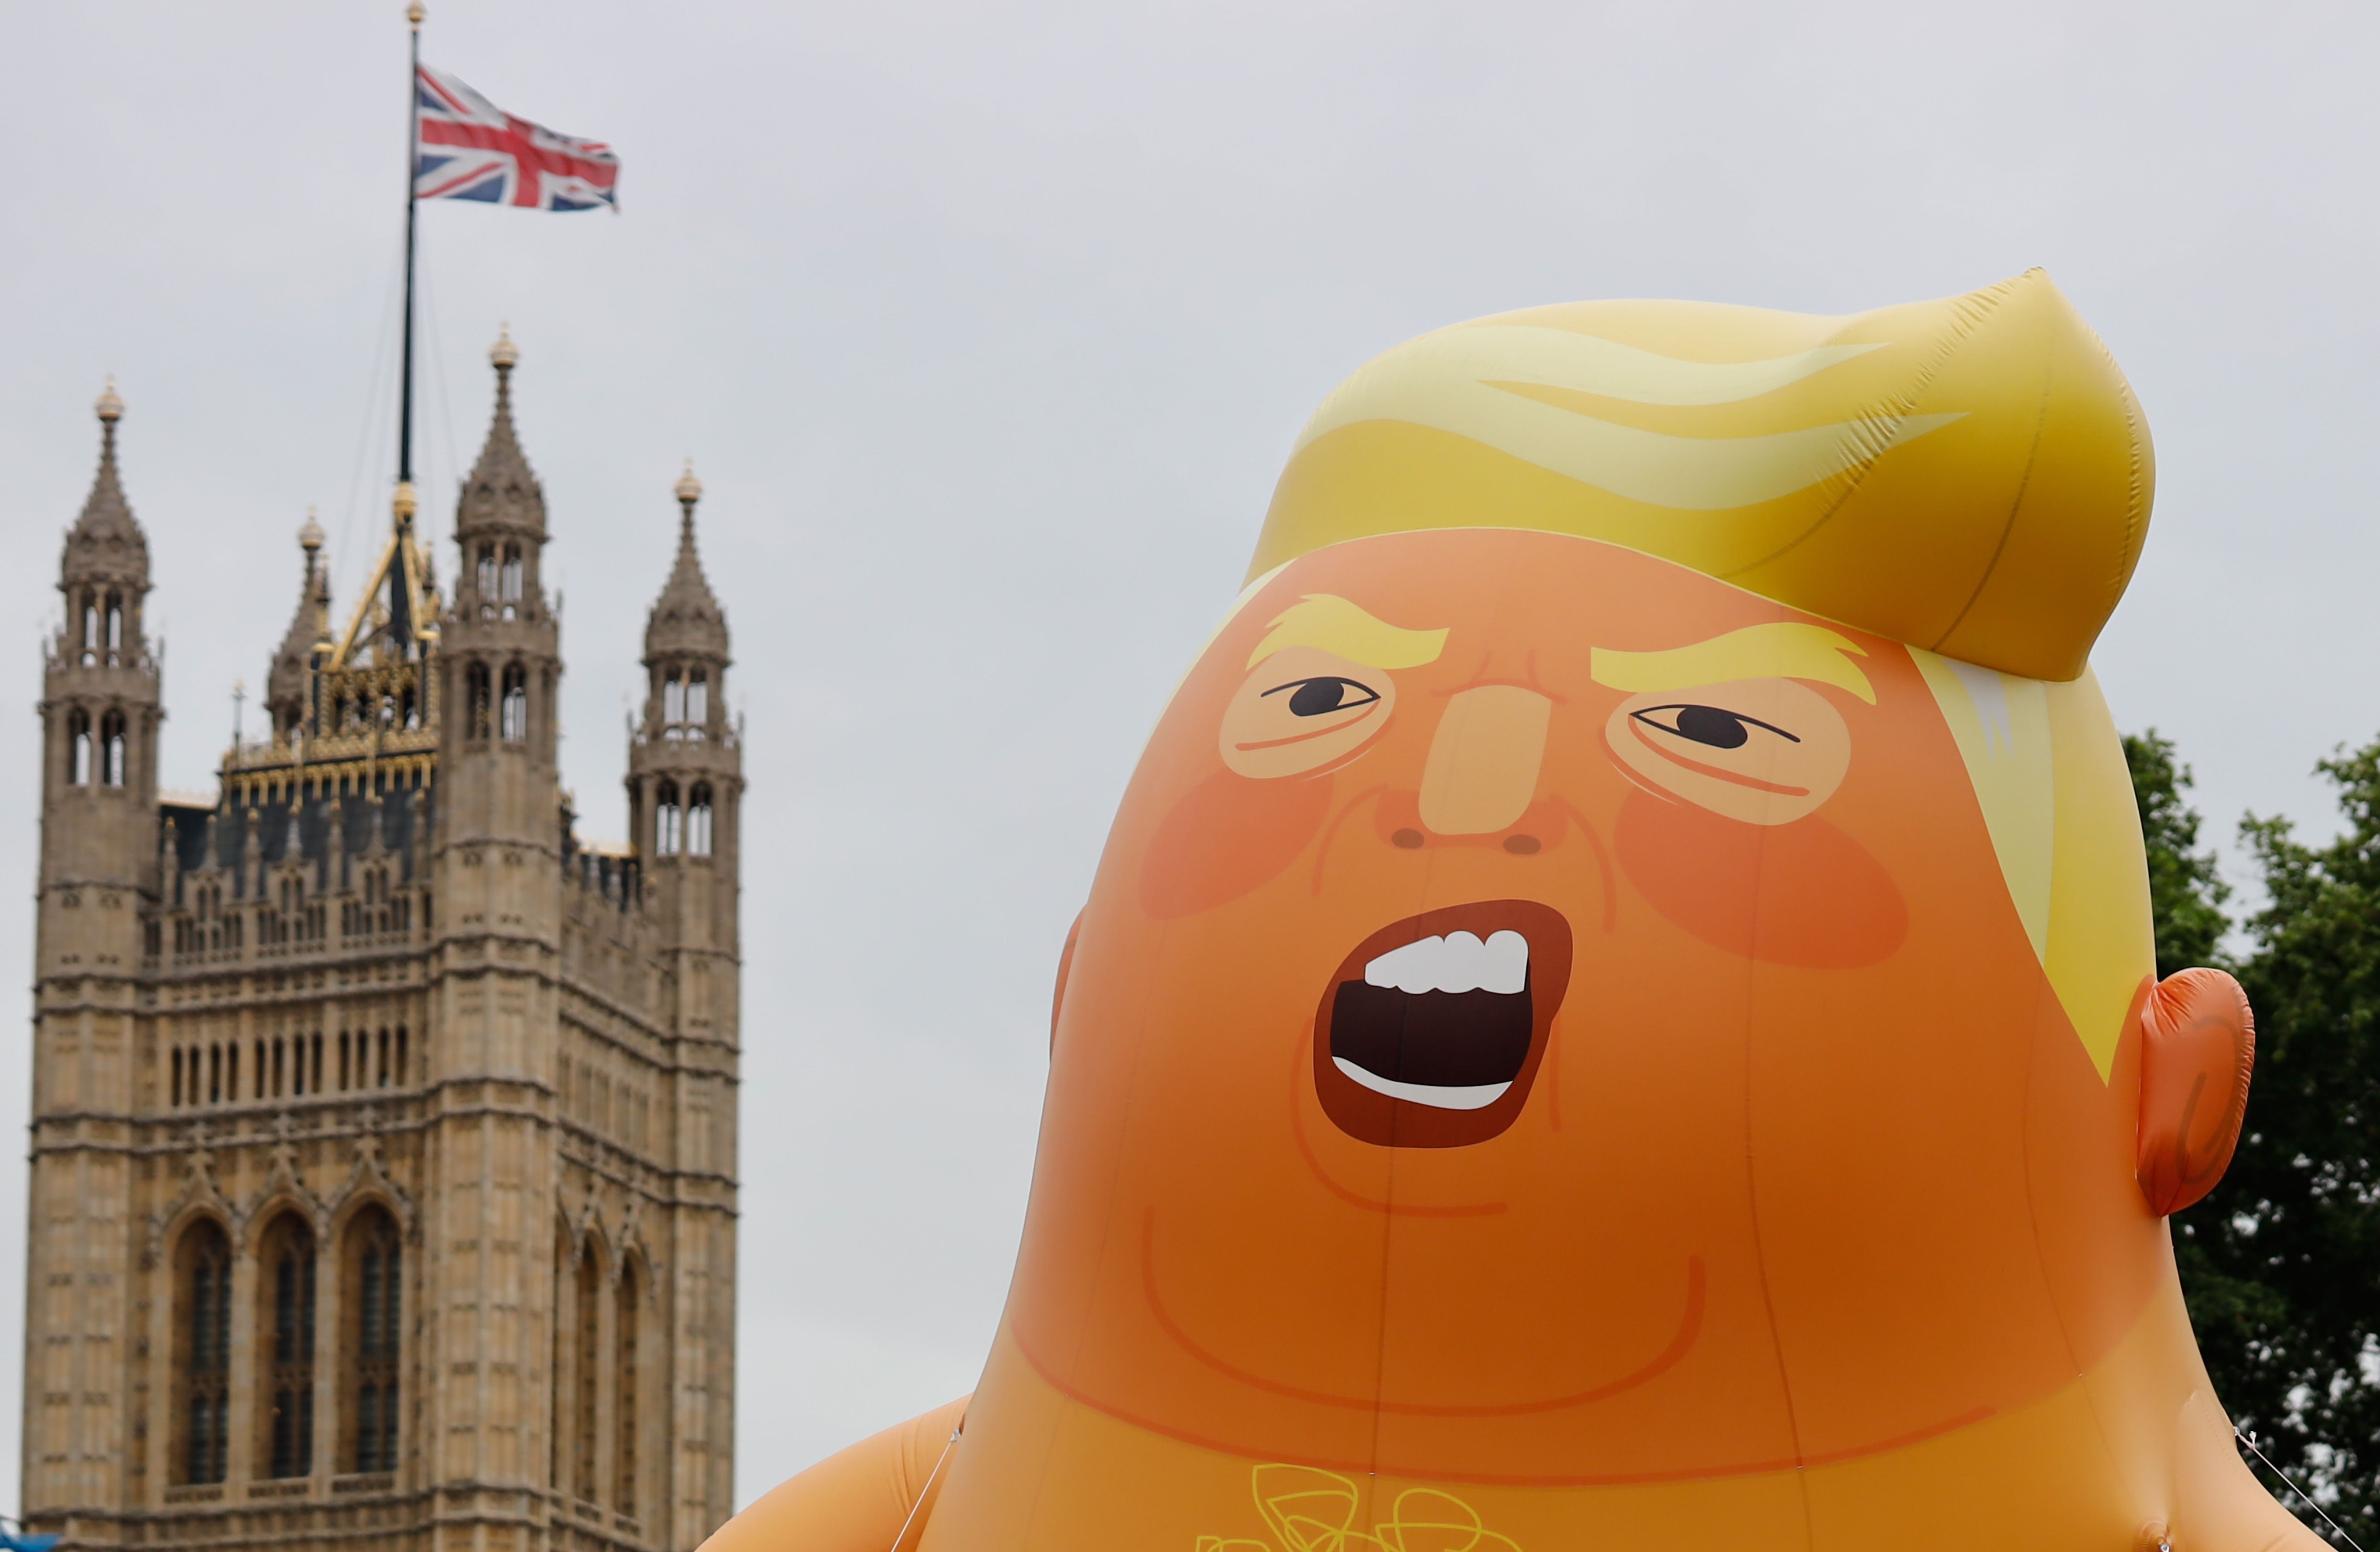 A giant balloon depicting US President Donald Trump as an orange baby floats above anti-Trump demonstrators in Parliament Square, London, on June 4, 2019 -- the second day of Trump's three-day state visit to the UK.